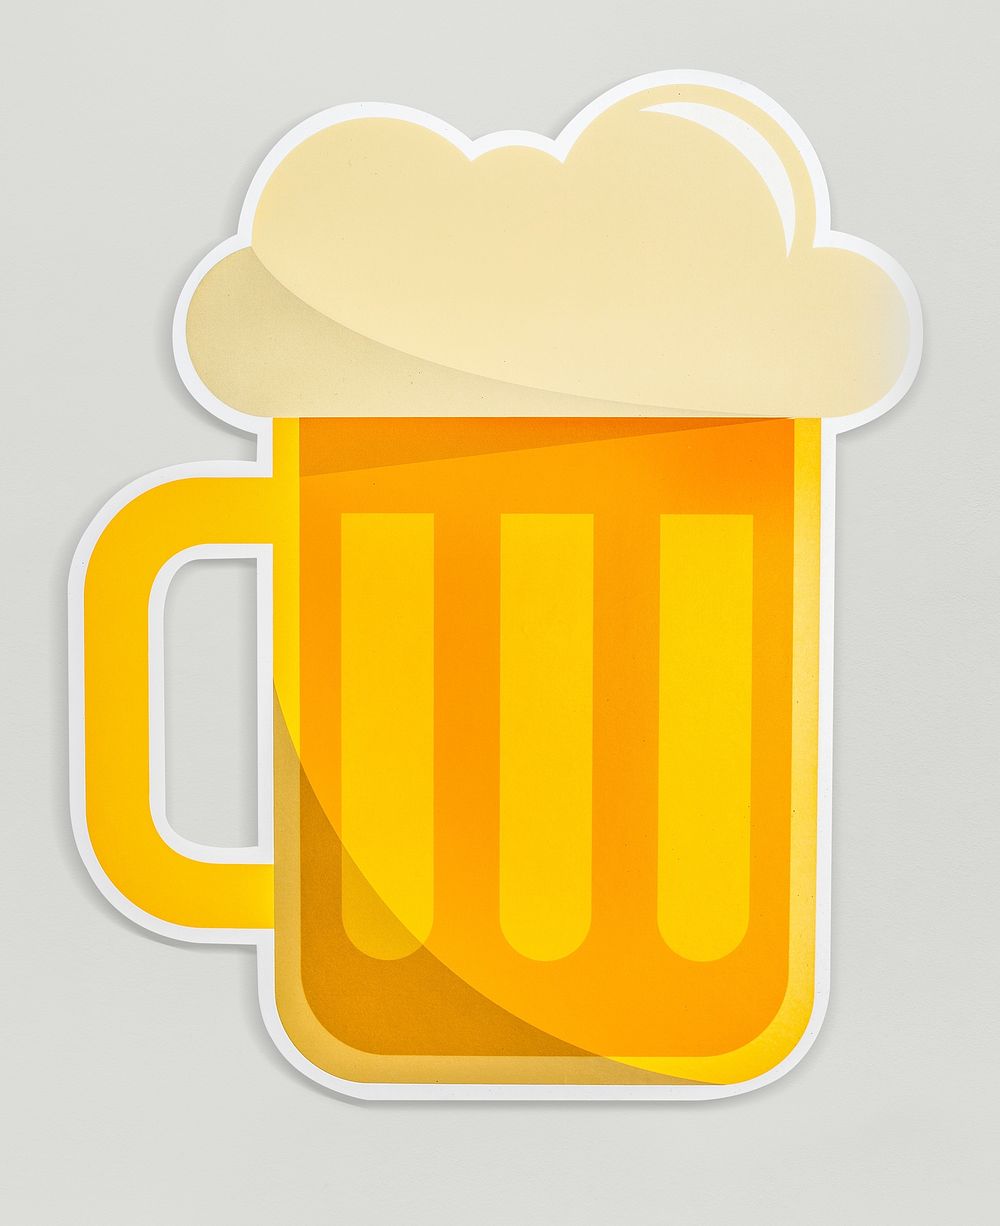 A glass of beer icon isolated